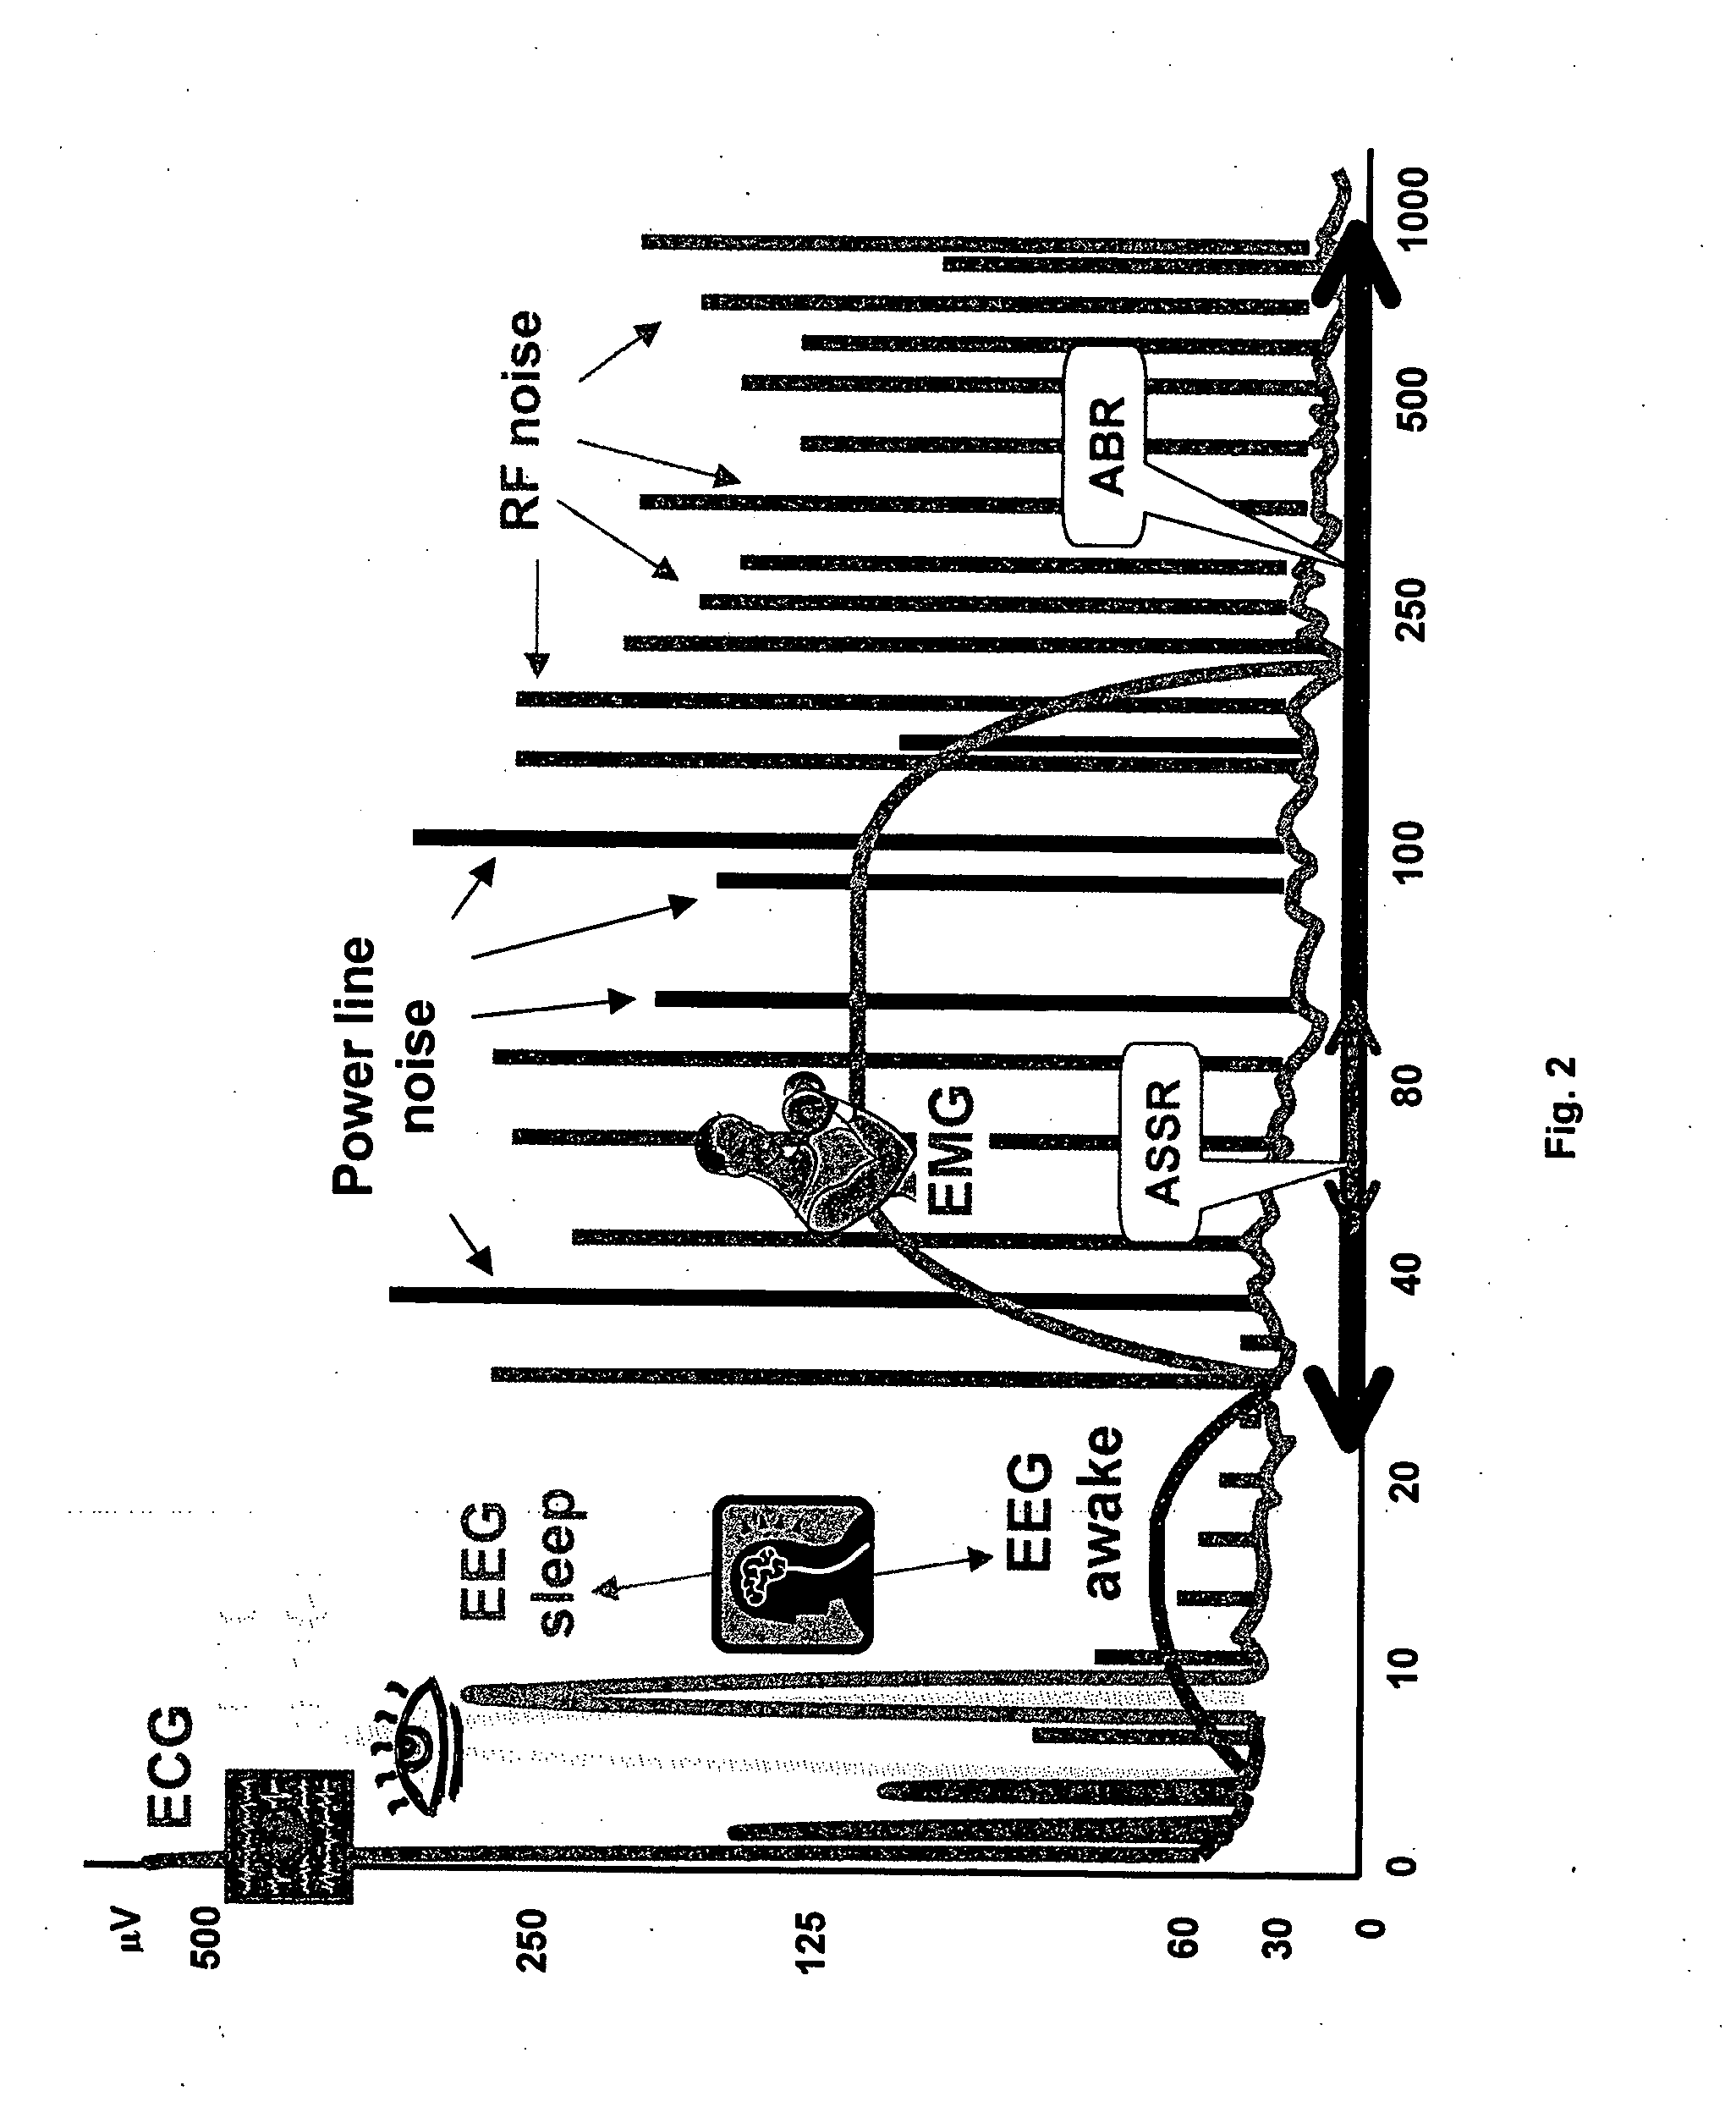 System and method for filtering and detecting faint signals in noise